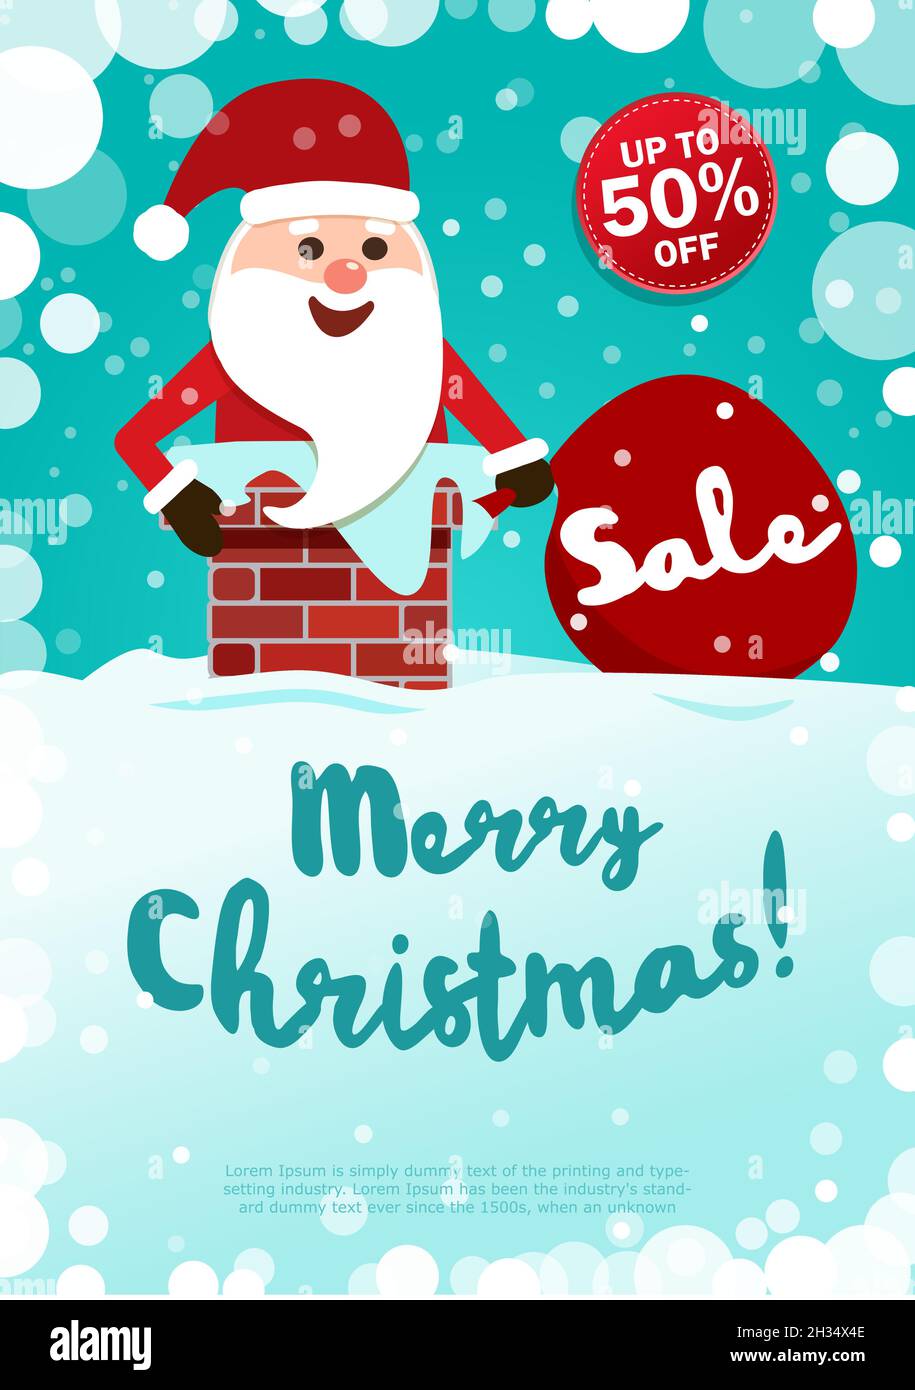 Poster Merry Christmas. Sale up to 50 off. Santa Claus Stock Vector